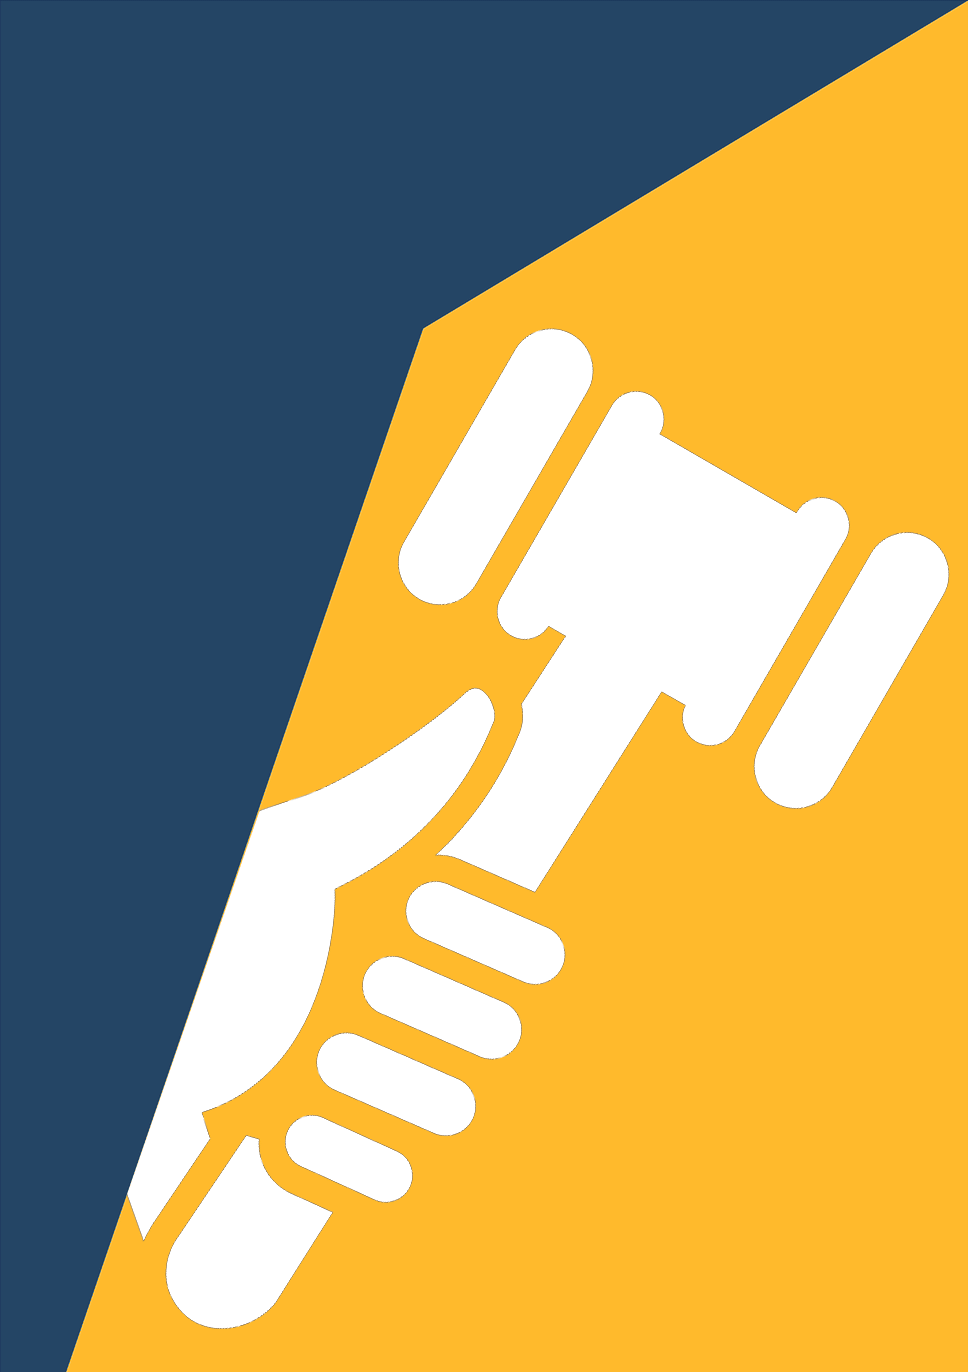 Image of a hand holding a gavel high, symbolizing an enforcement of judgment.